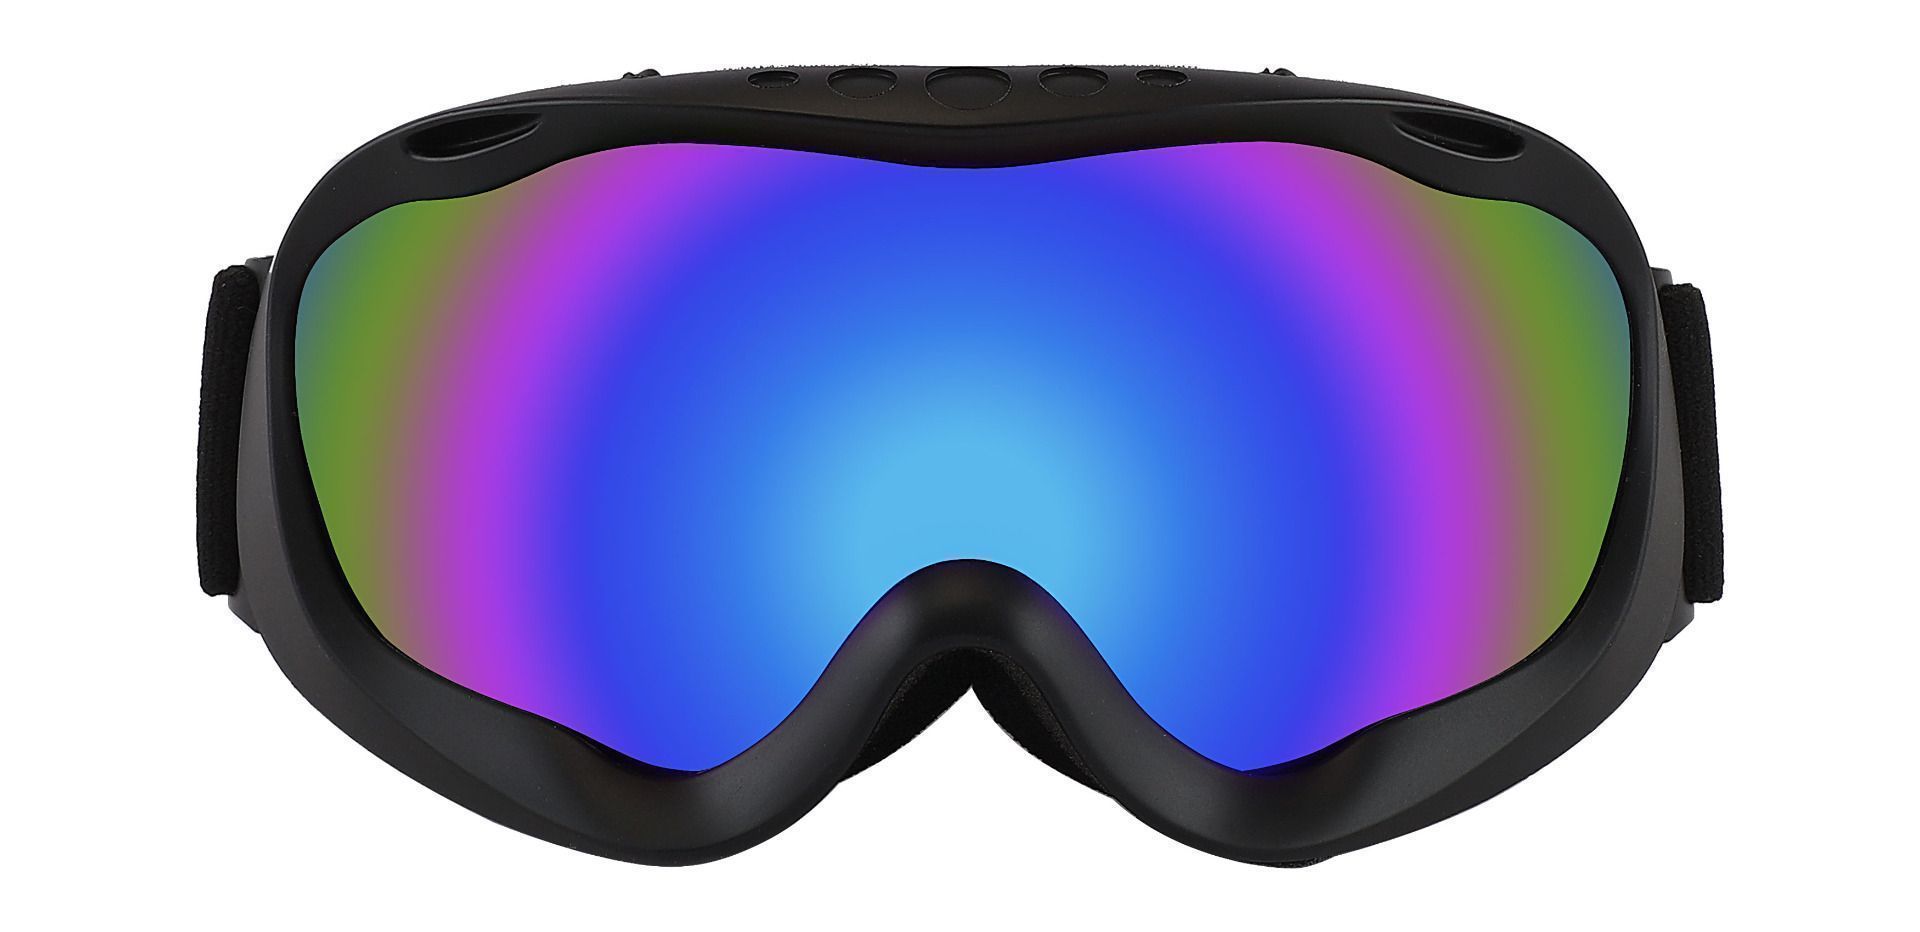 3 Pcs Snow Ski Goggles Snowboard Goggles Ski Glasses Hiking Accessories for  Kids Youth Men Women Boys Girls, White, Black and Multicolor, about 17 x 7  cm/ 6.7 x 2.8' : Amazon.in: